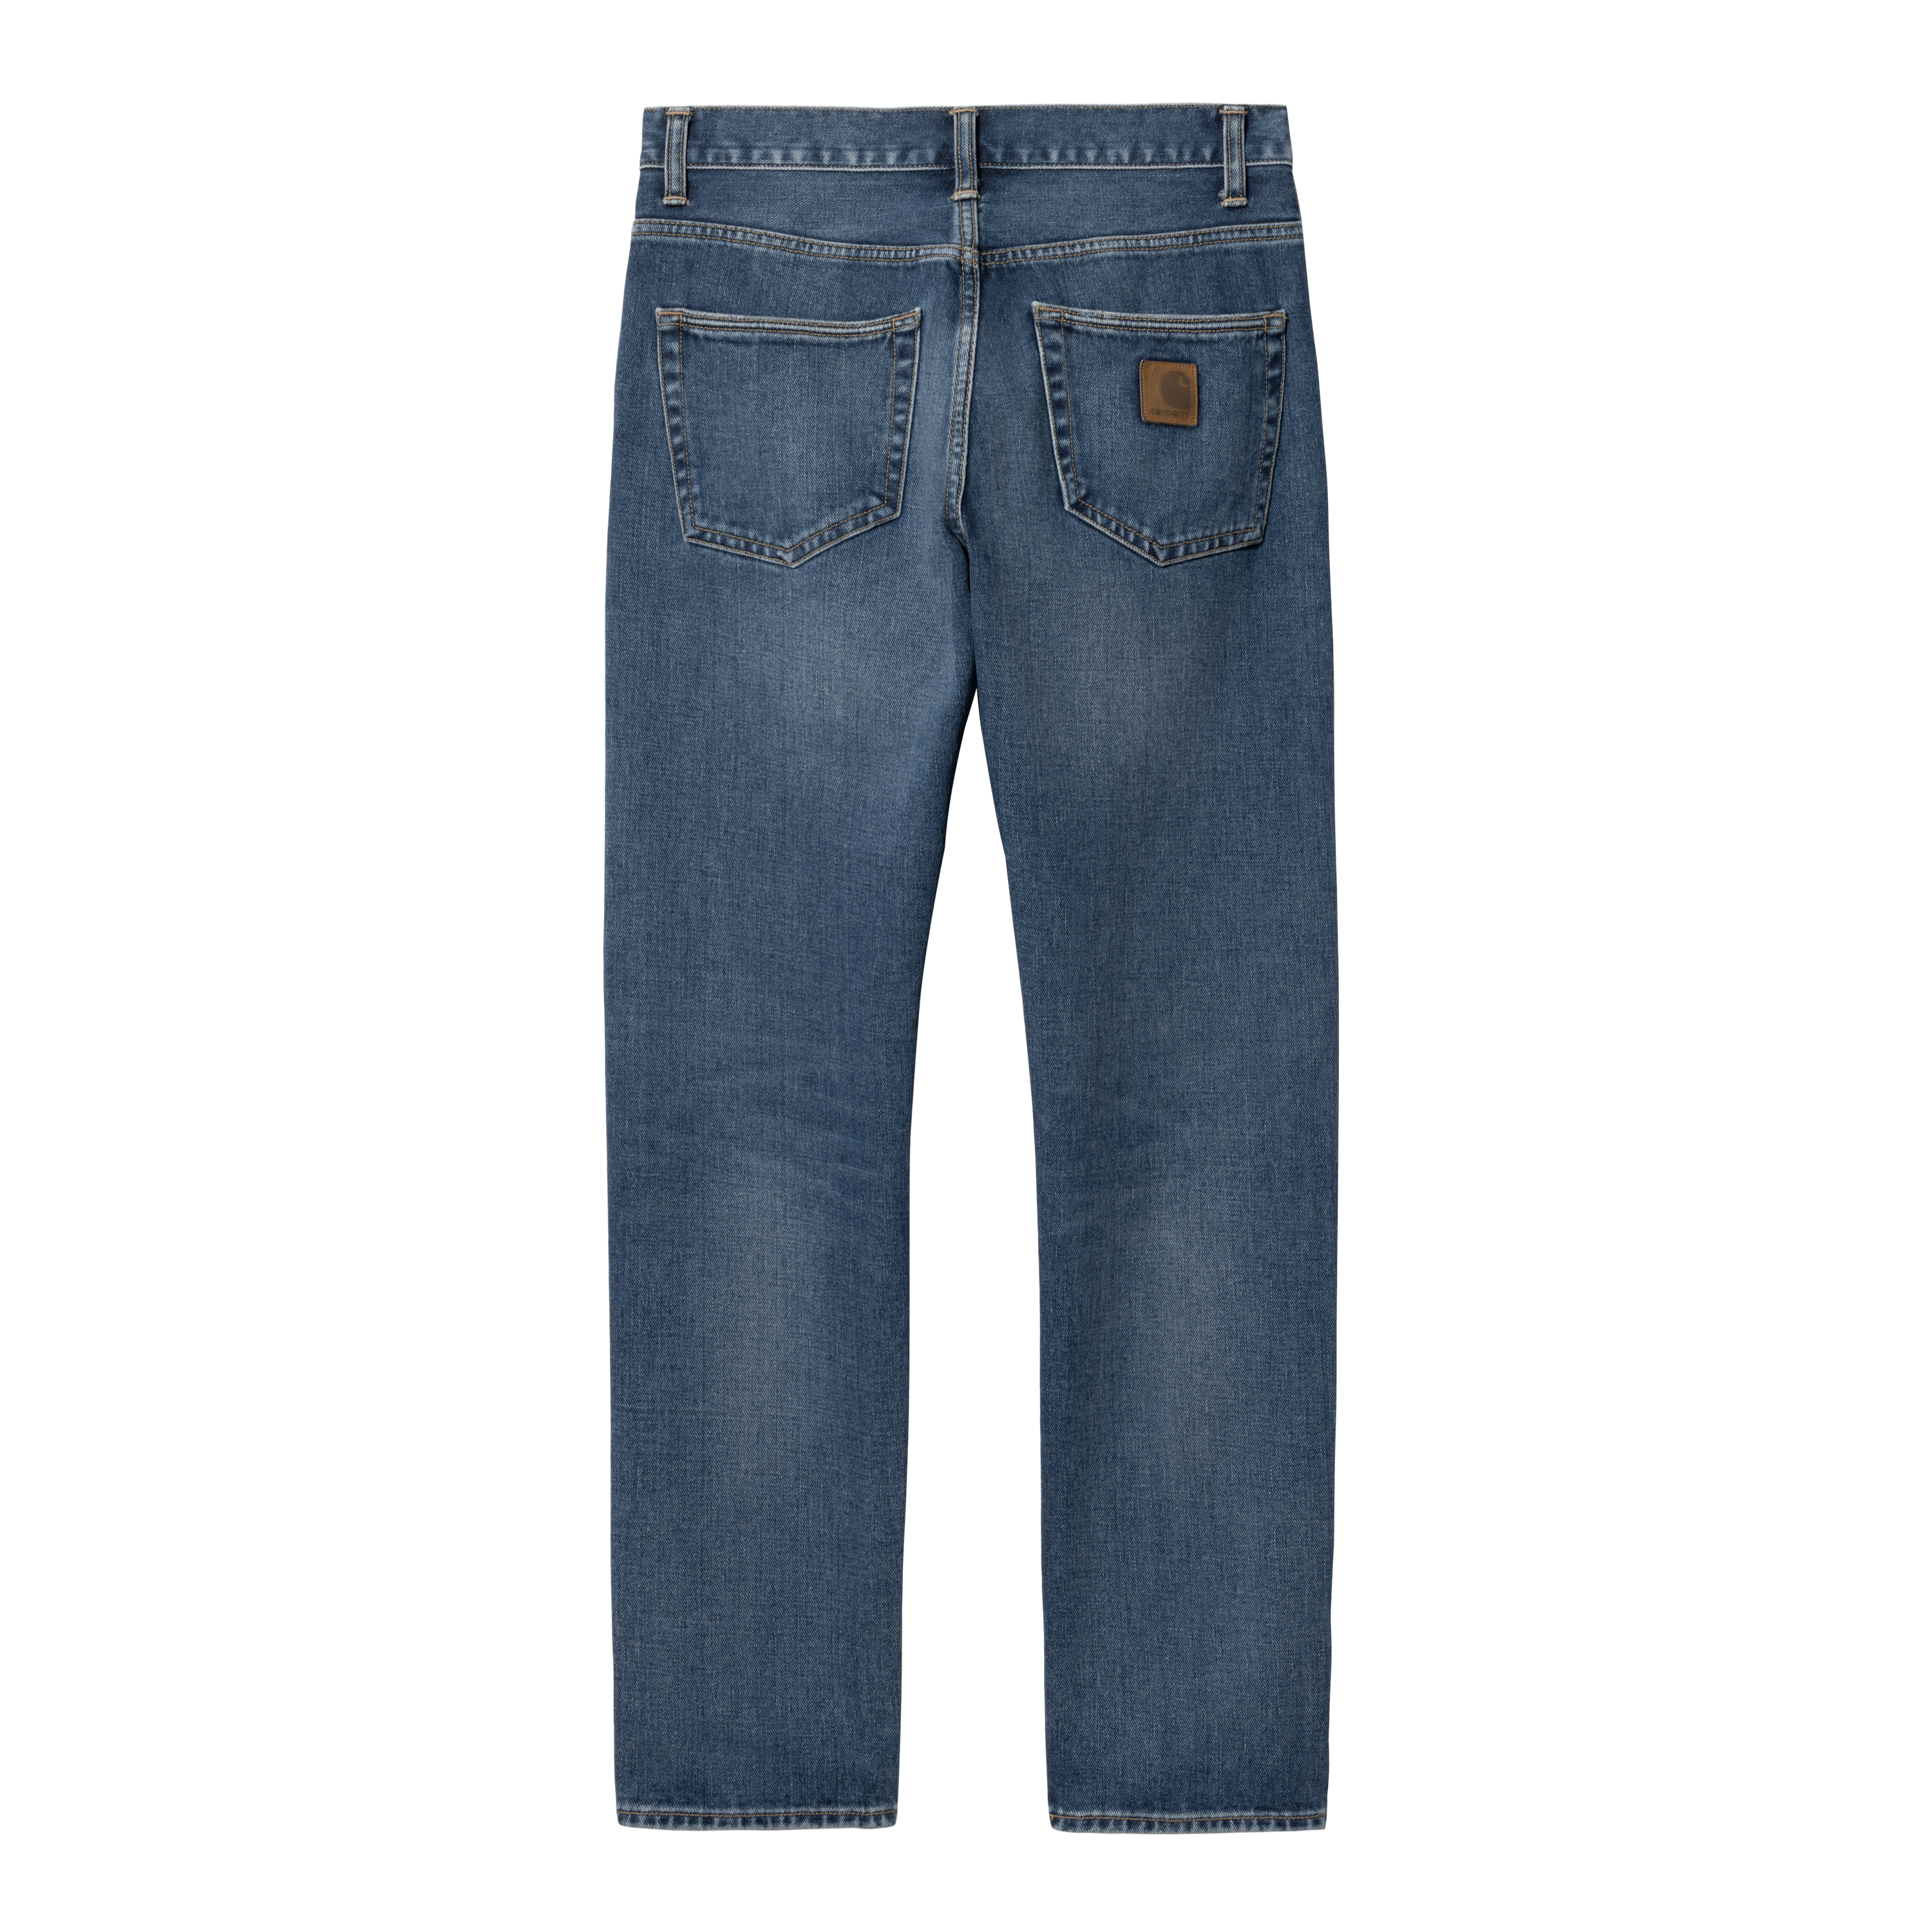 Carhartt, Jeans, Carhartt 1495 420 Vintage 90s Traditional Fit Jeans Size  40 X 30